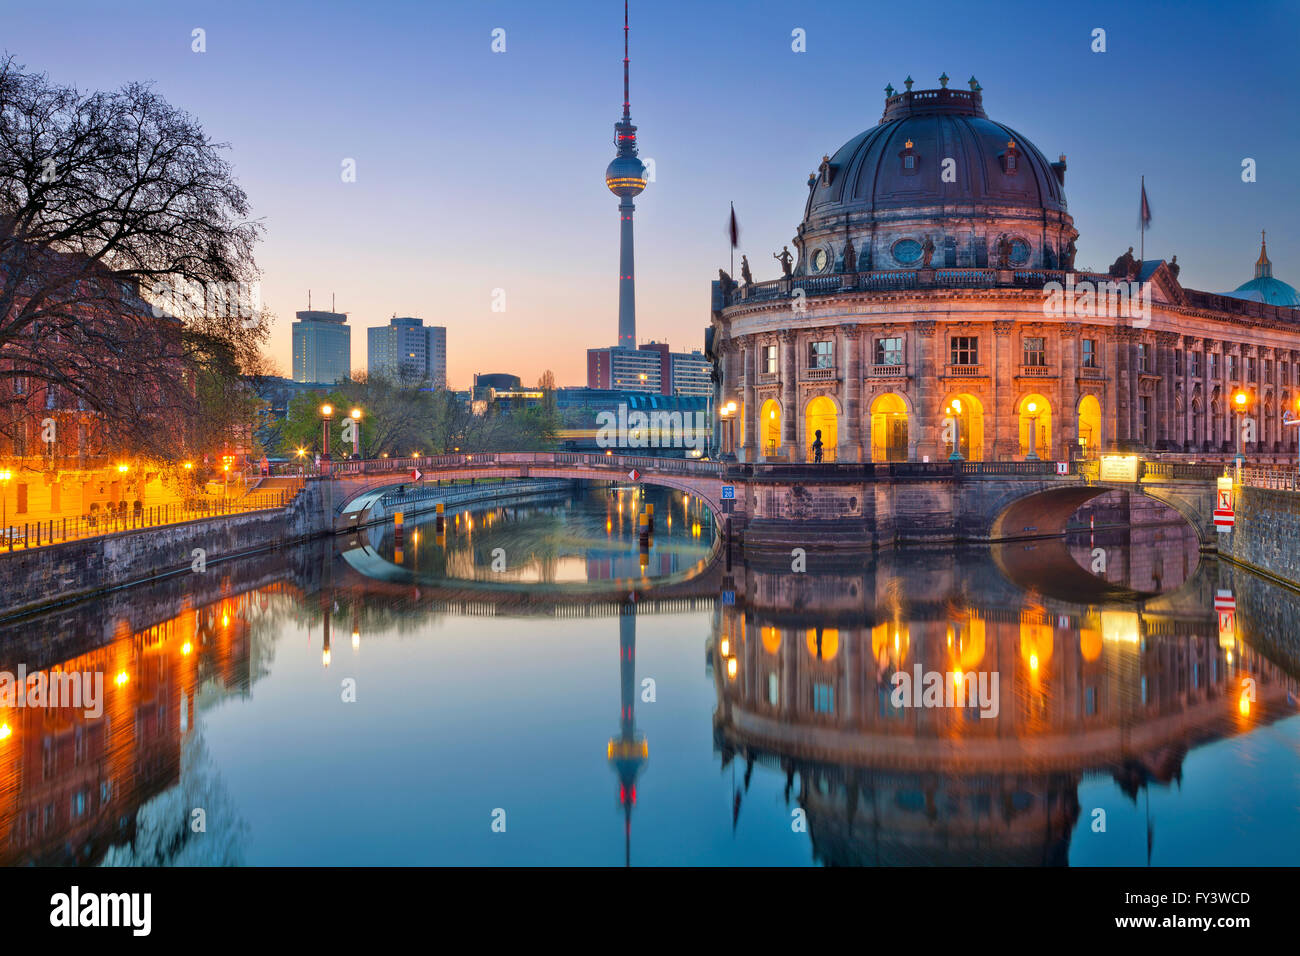 Berlin. Image of Museum Island and TV Tower in Berlin, Germany. Stock Photo